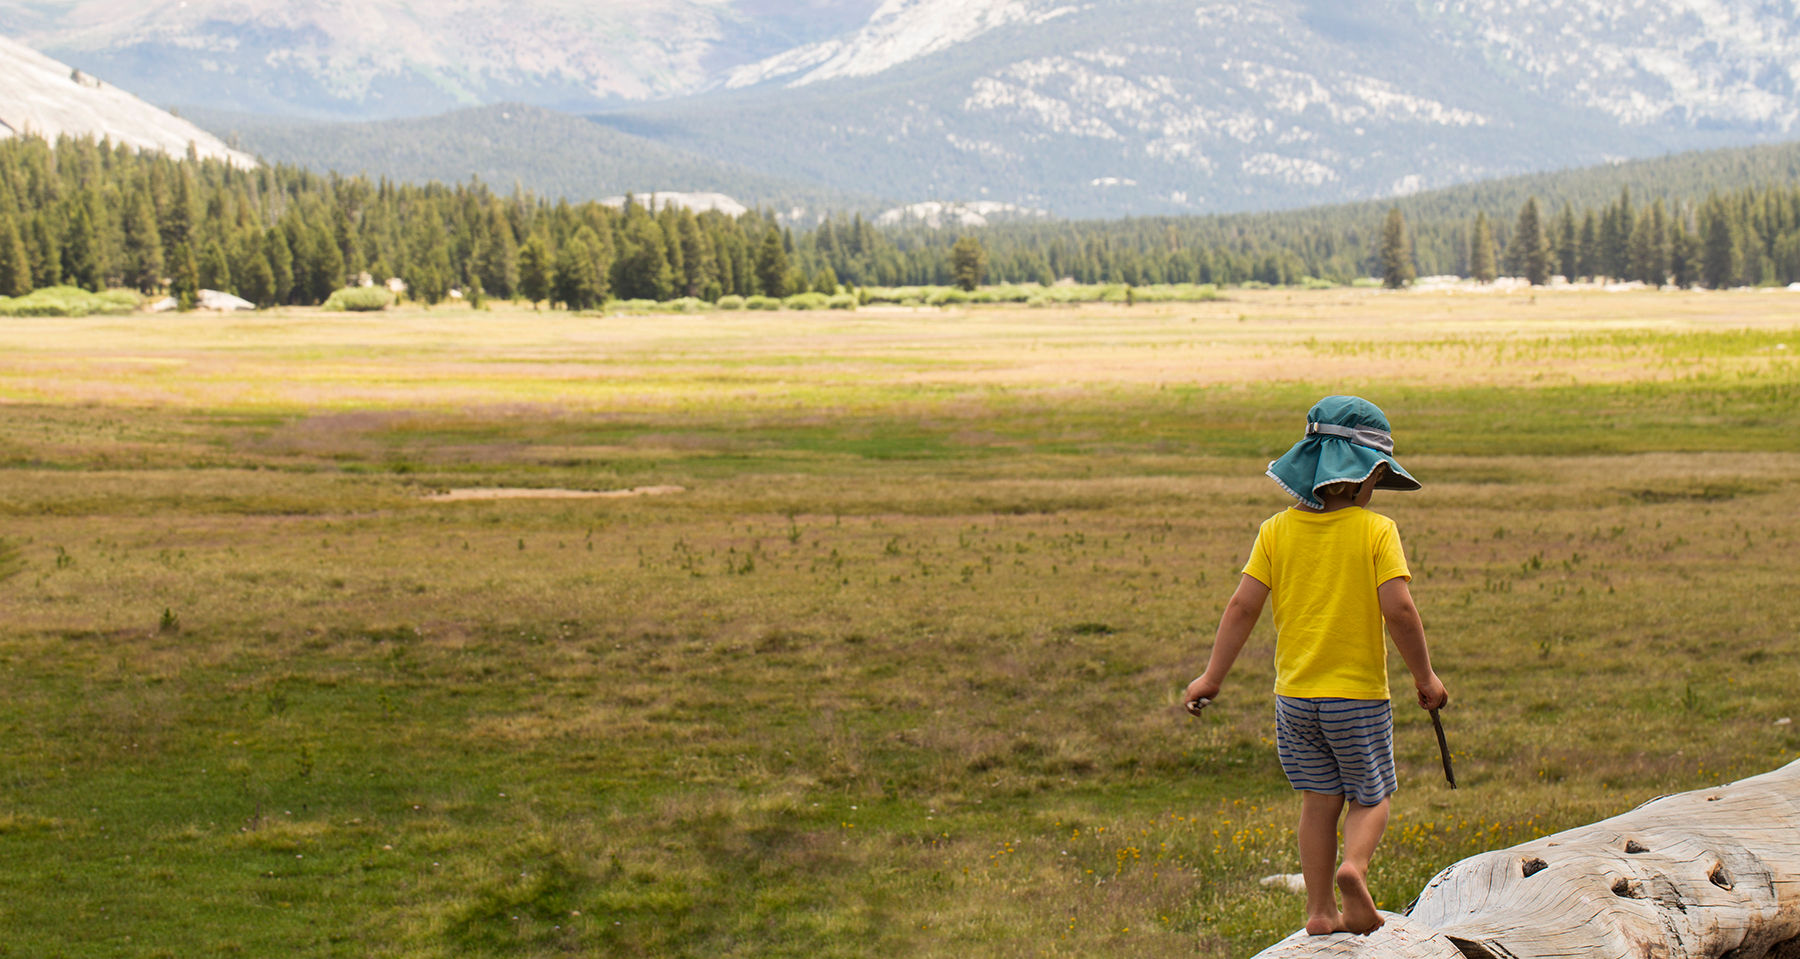 Little one playing in Tuolumne Meadows